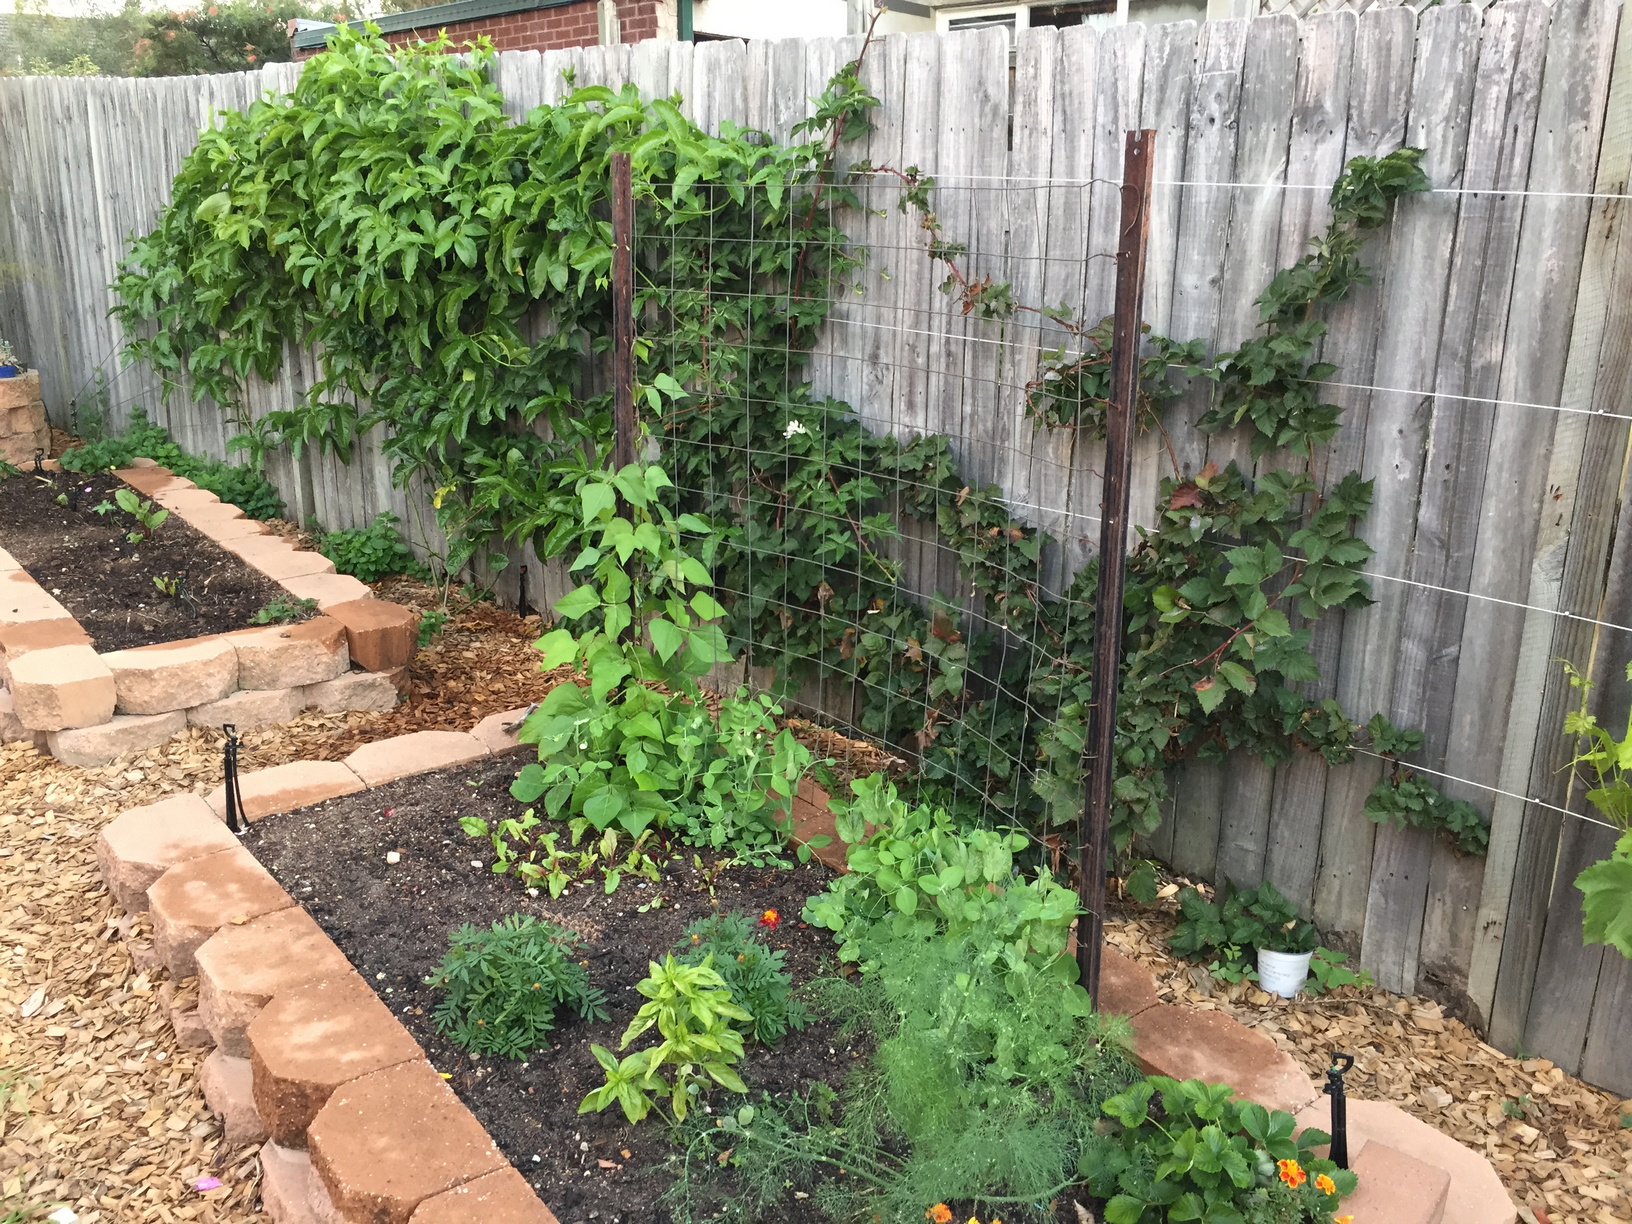 The passionfruit and the thornless blackberry behind the veggie beds. I have a random assortment of veggies growing there already and have planted a lot of new seeds to fill in some of the bare patches recently.